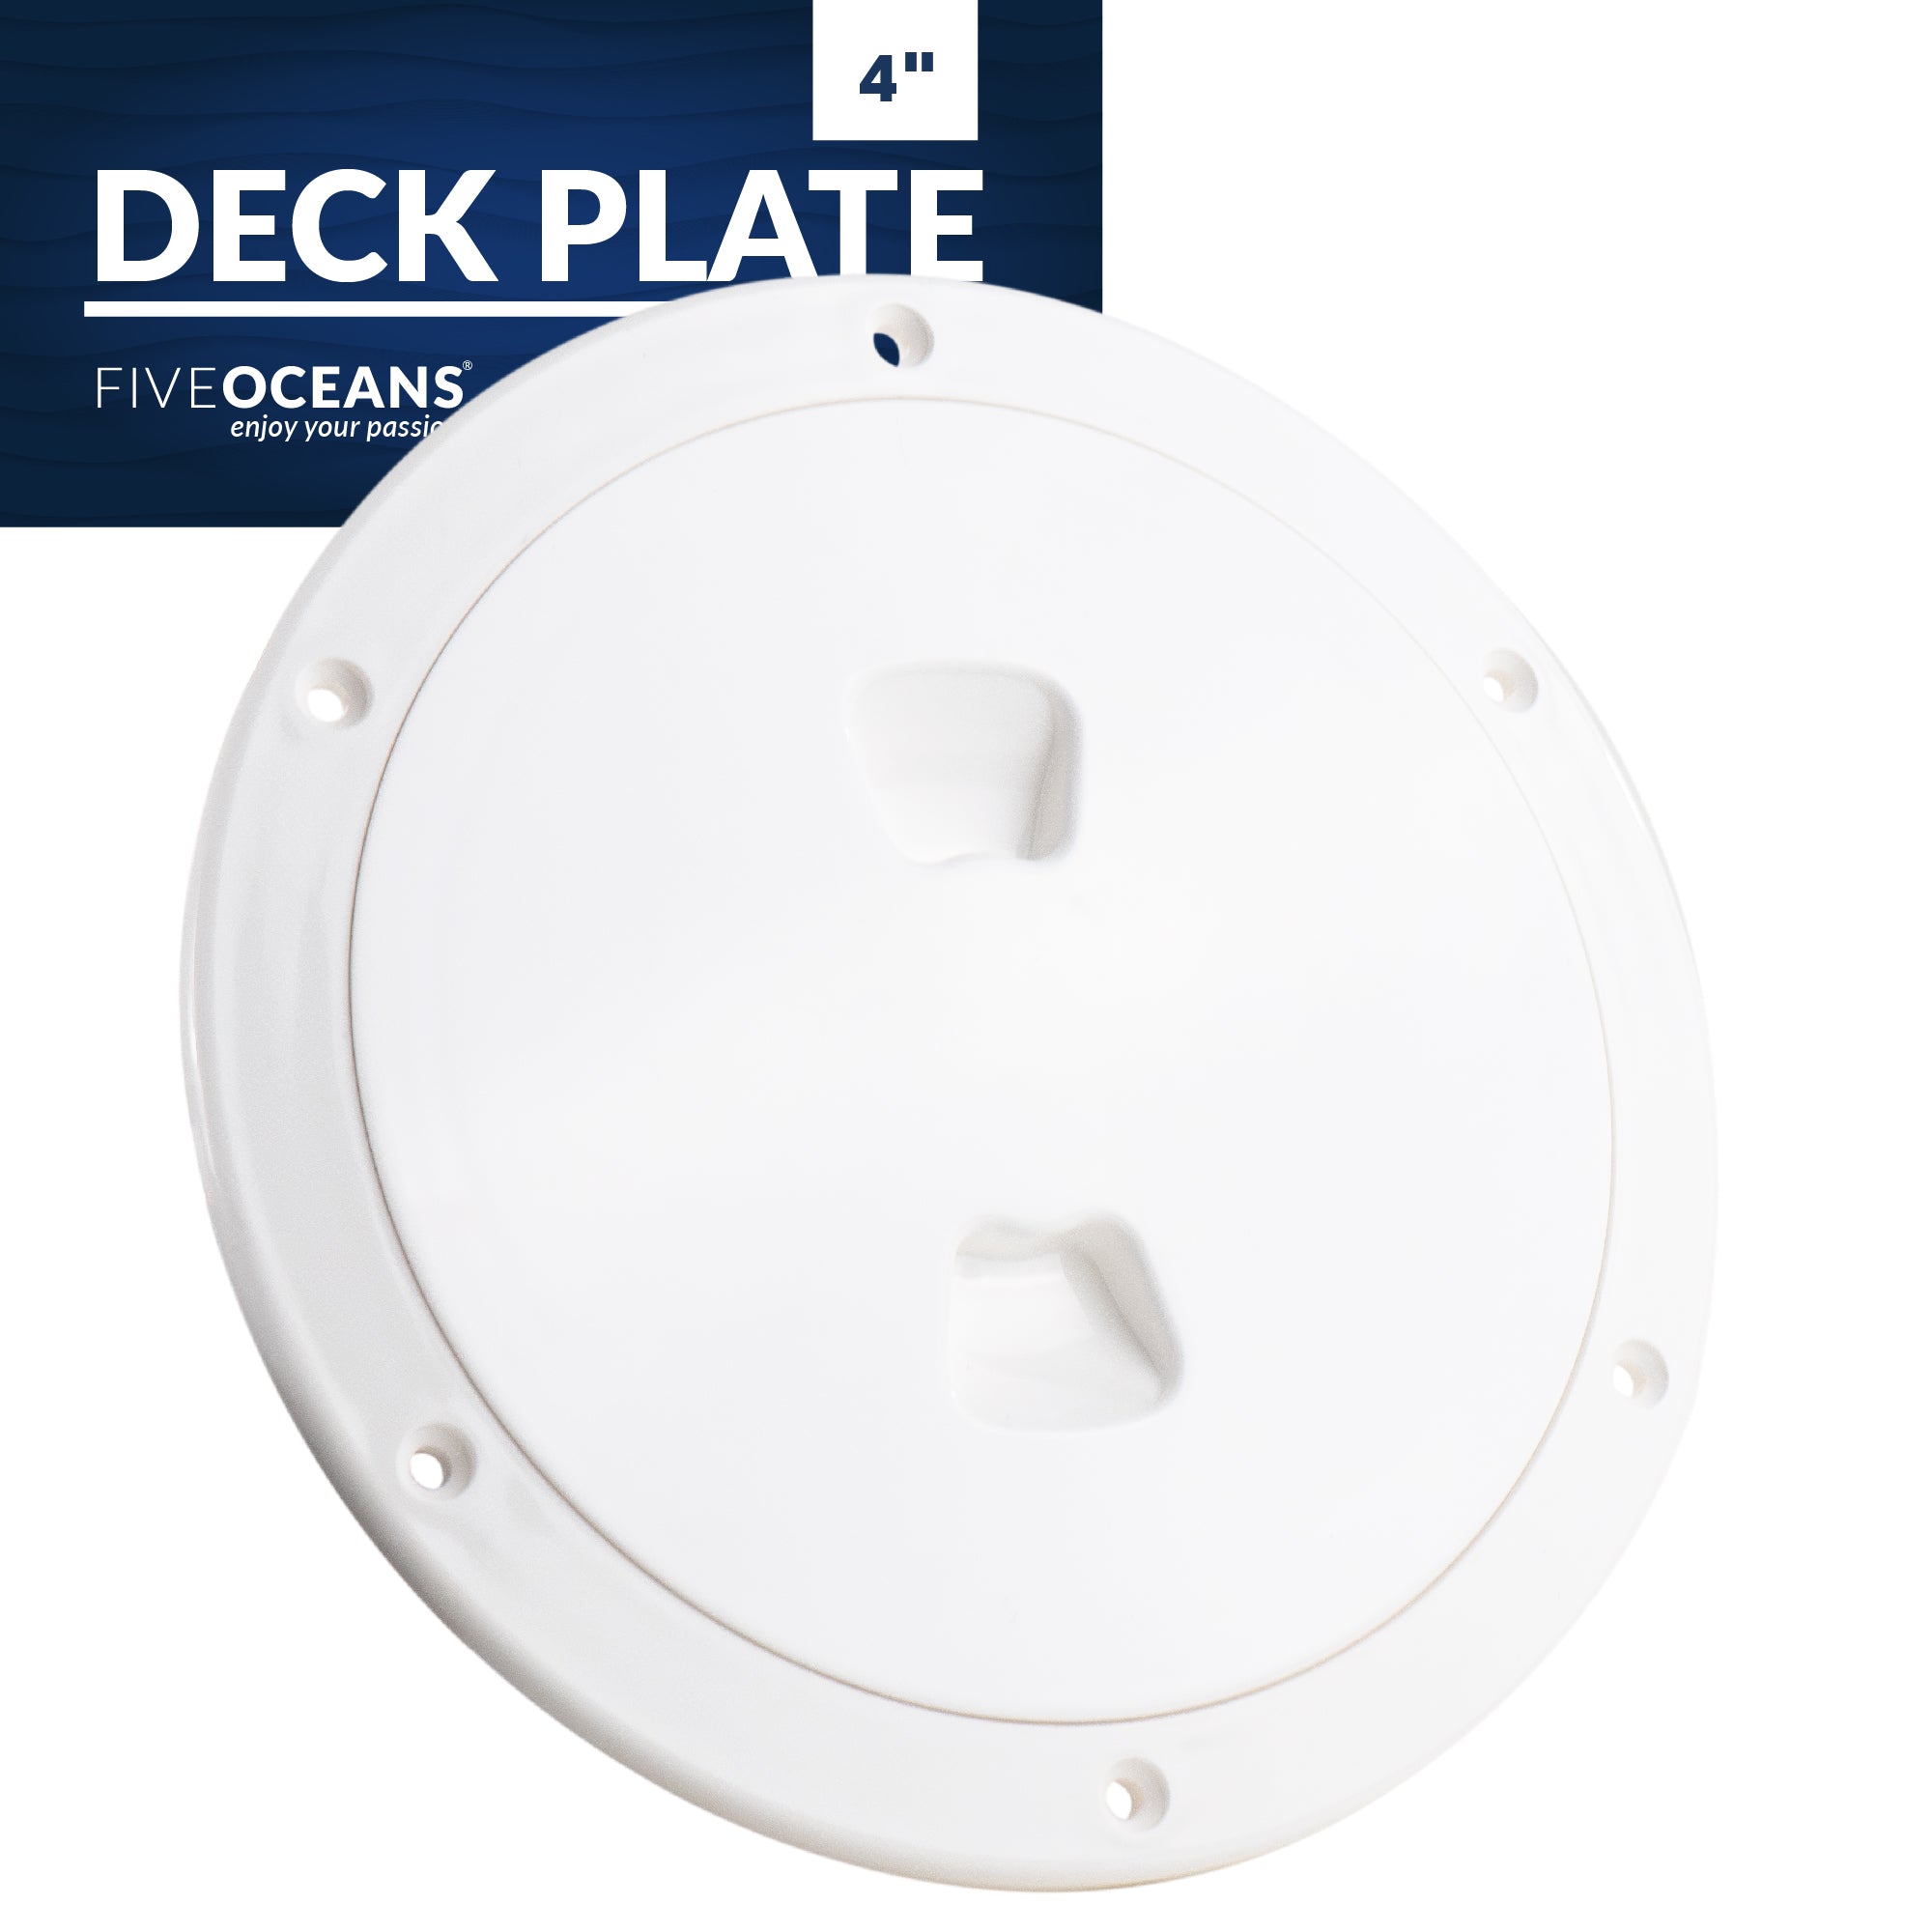 4" Deck Plate, Round Off-White - FO4473